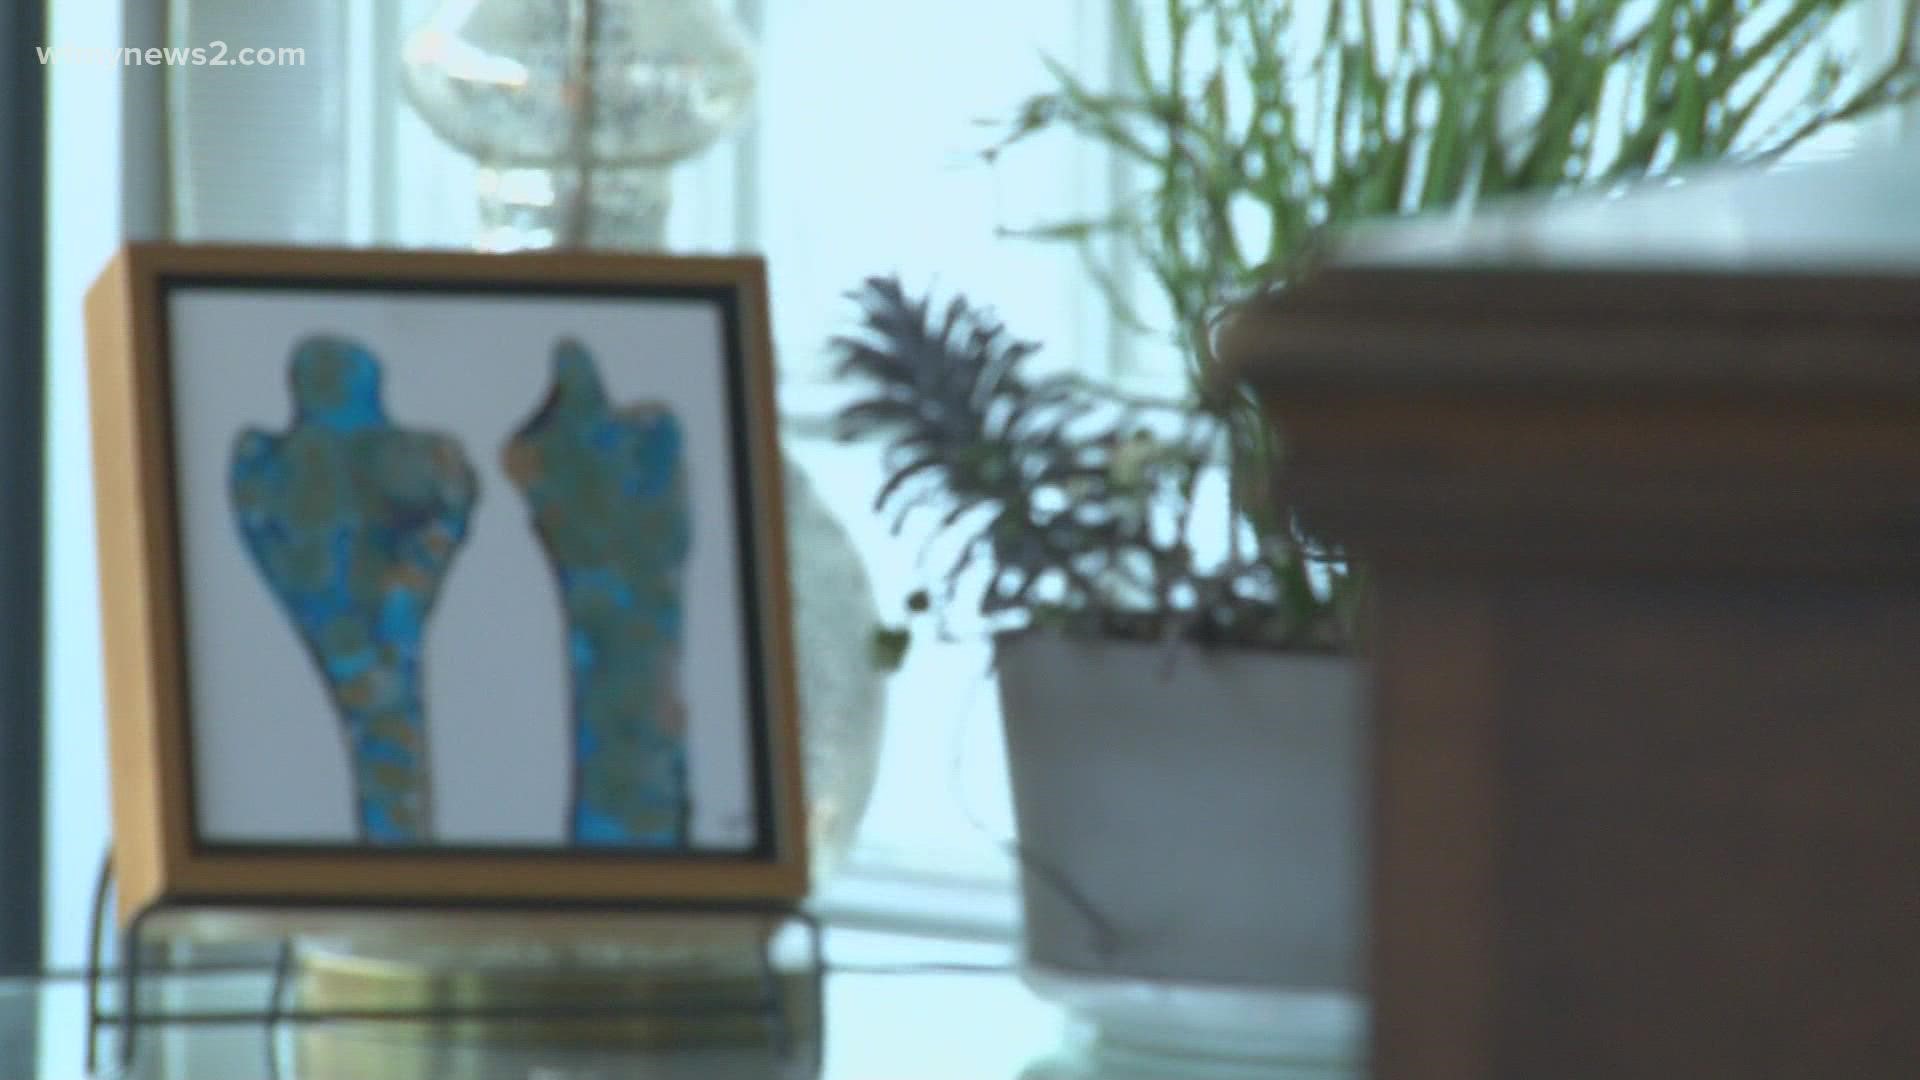 A small business owner and artist first started selling his work to pay the bills. Now, he's spreading awareness about ALS in memory of his father who died in 2017.